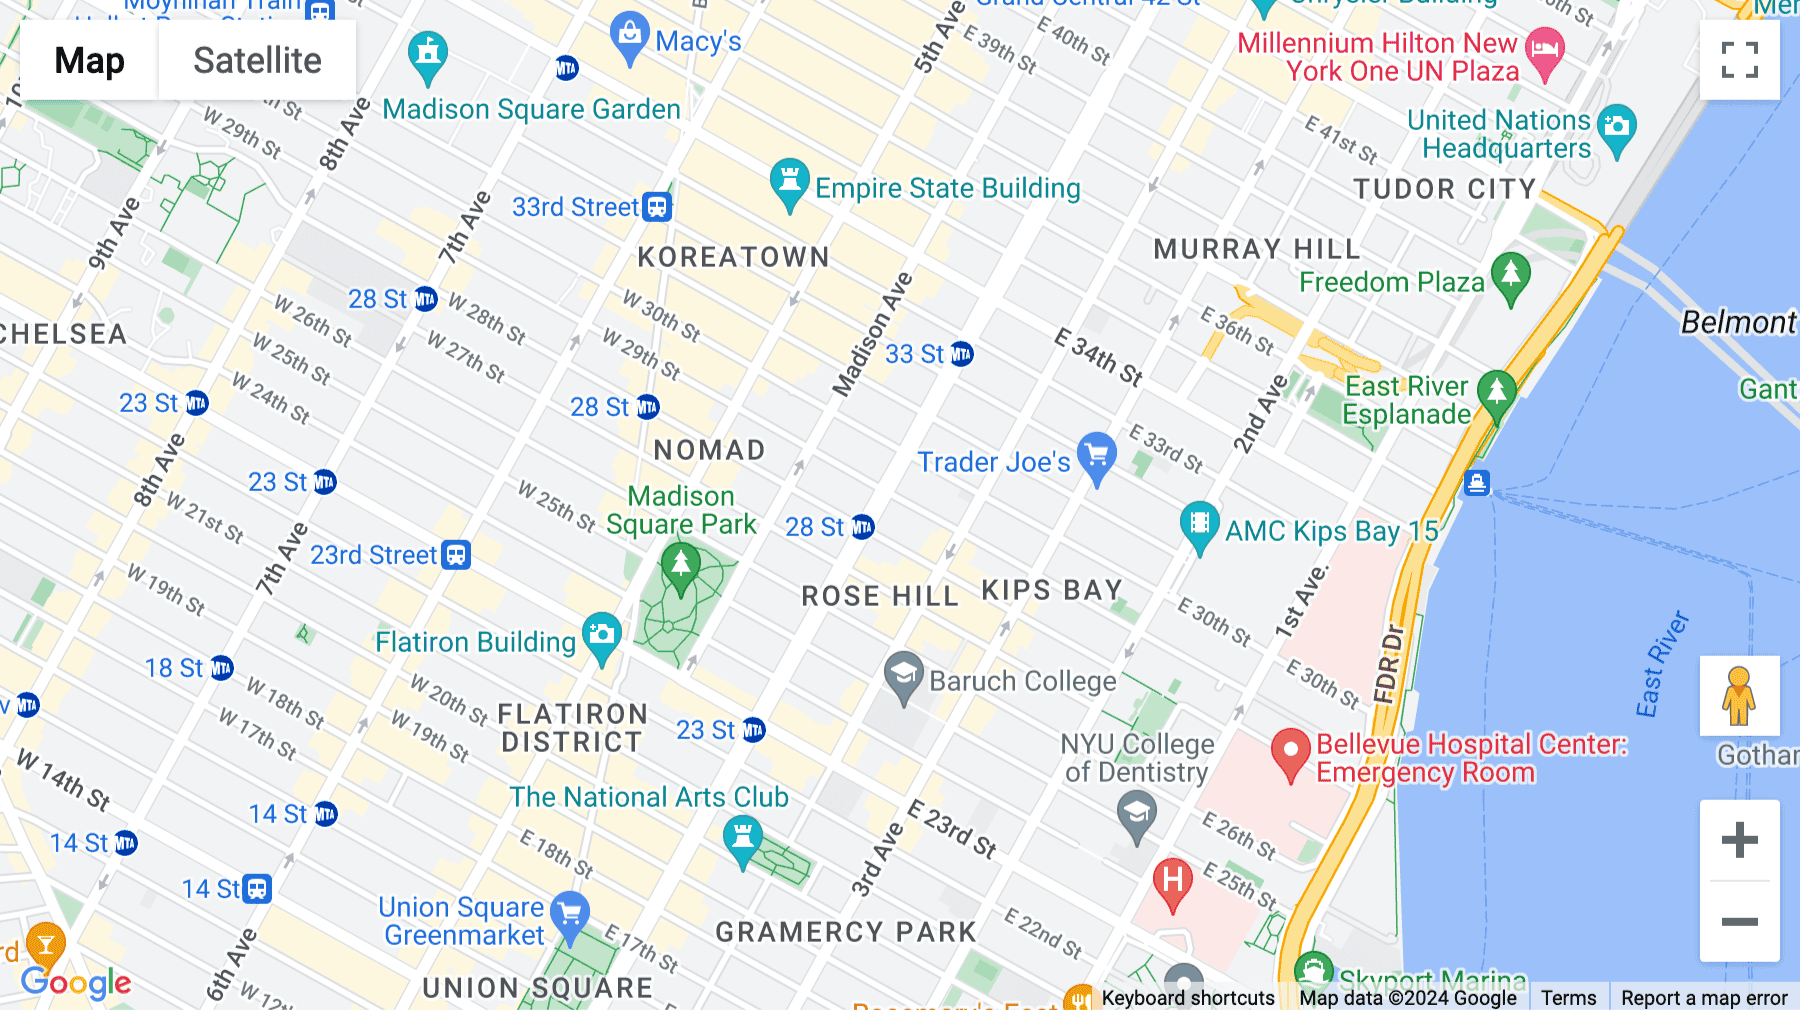 Click for interative map of 419 Park Avenue South, New York City